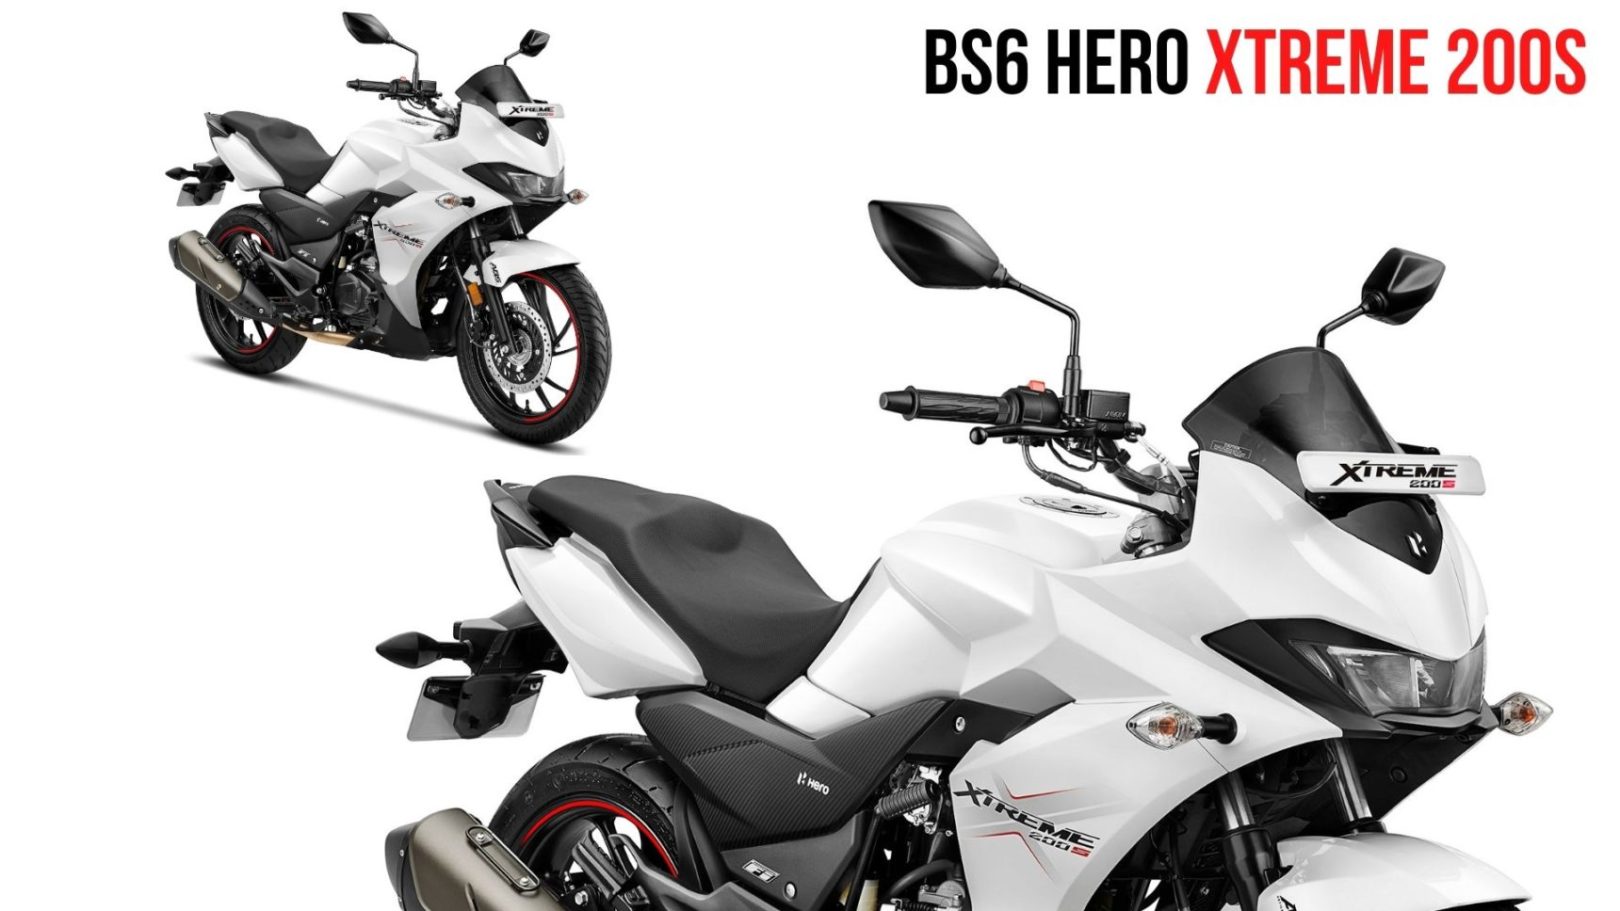 Hero Xtreme 160R Images [HD]: Photo Gallery of Hero Xtreme 160R - DriveSpark